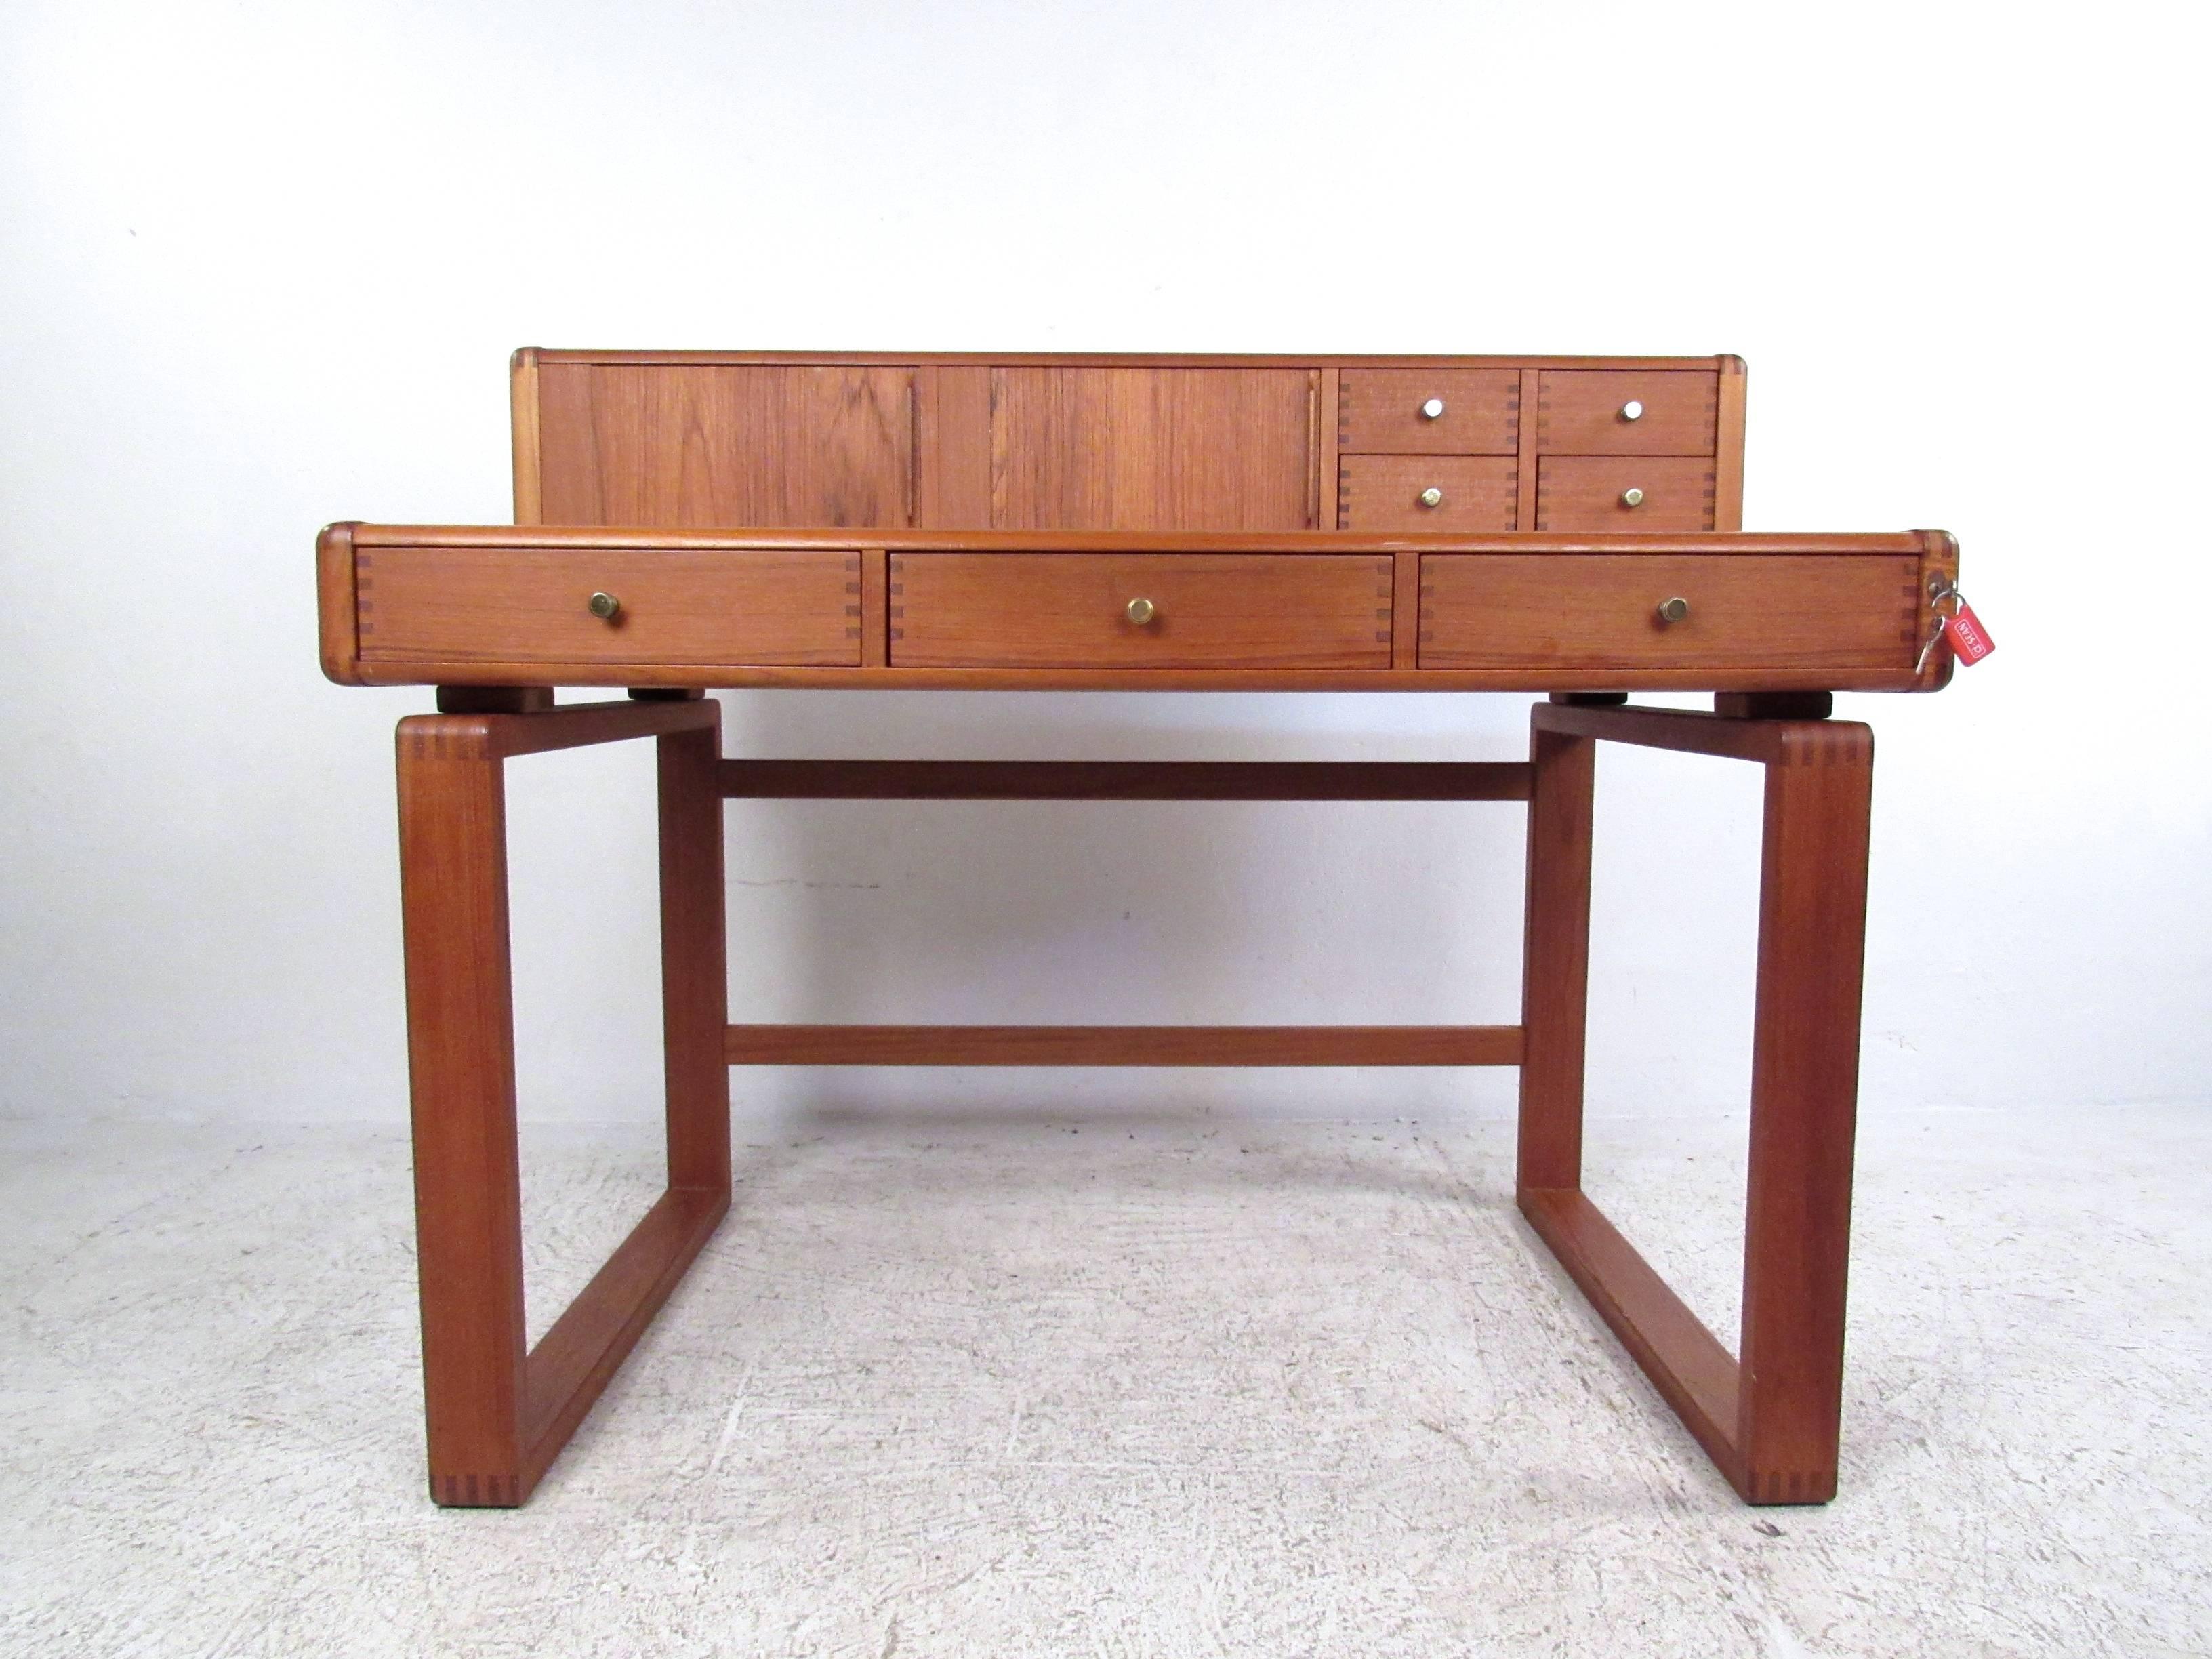 This unique sled leg desk offers a compact yet versatile desk, with a removable teak topper which provides added storage for organization. This beautiful vintage desk features sturdy dove-tail construction and makes an impressive addition to home or